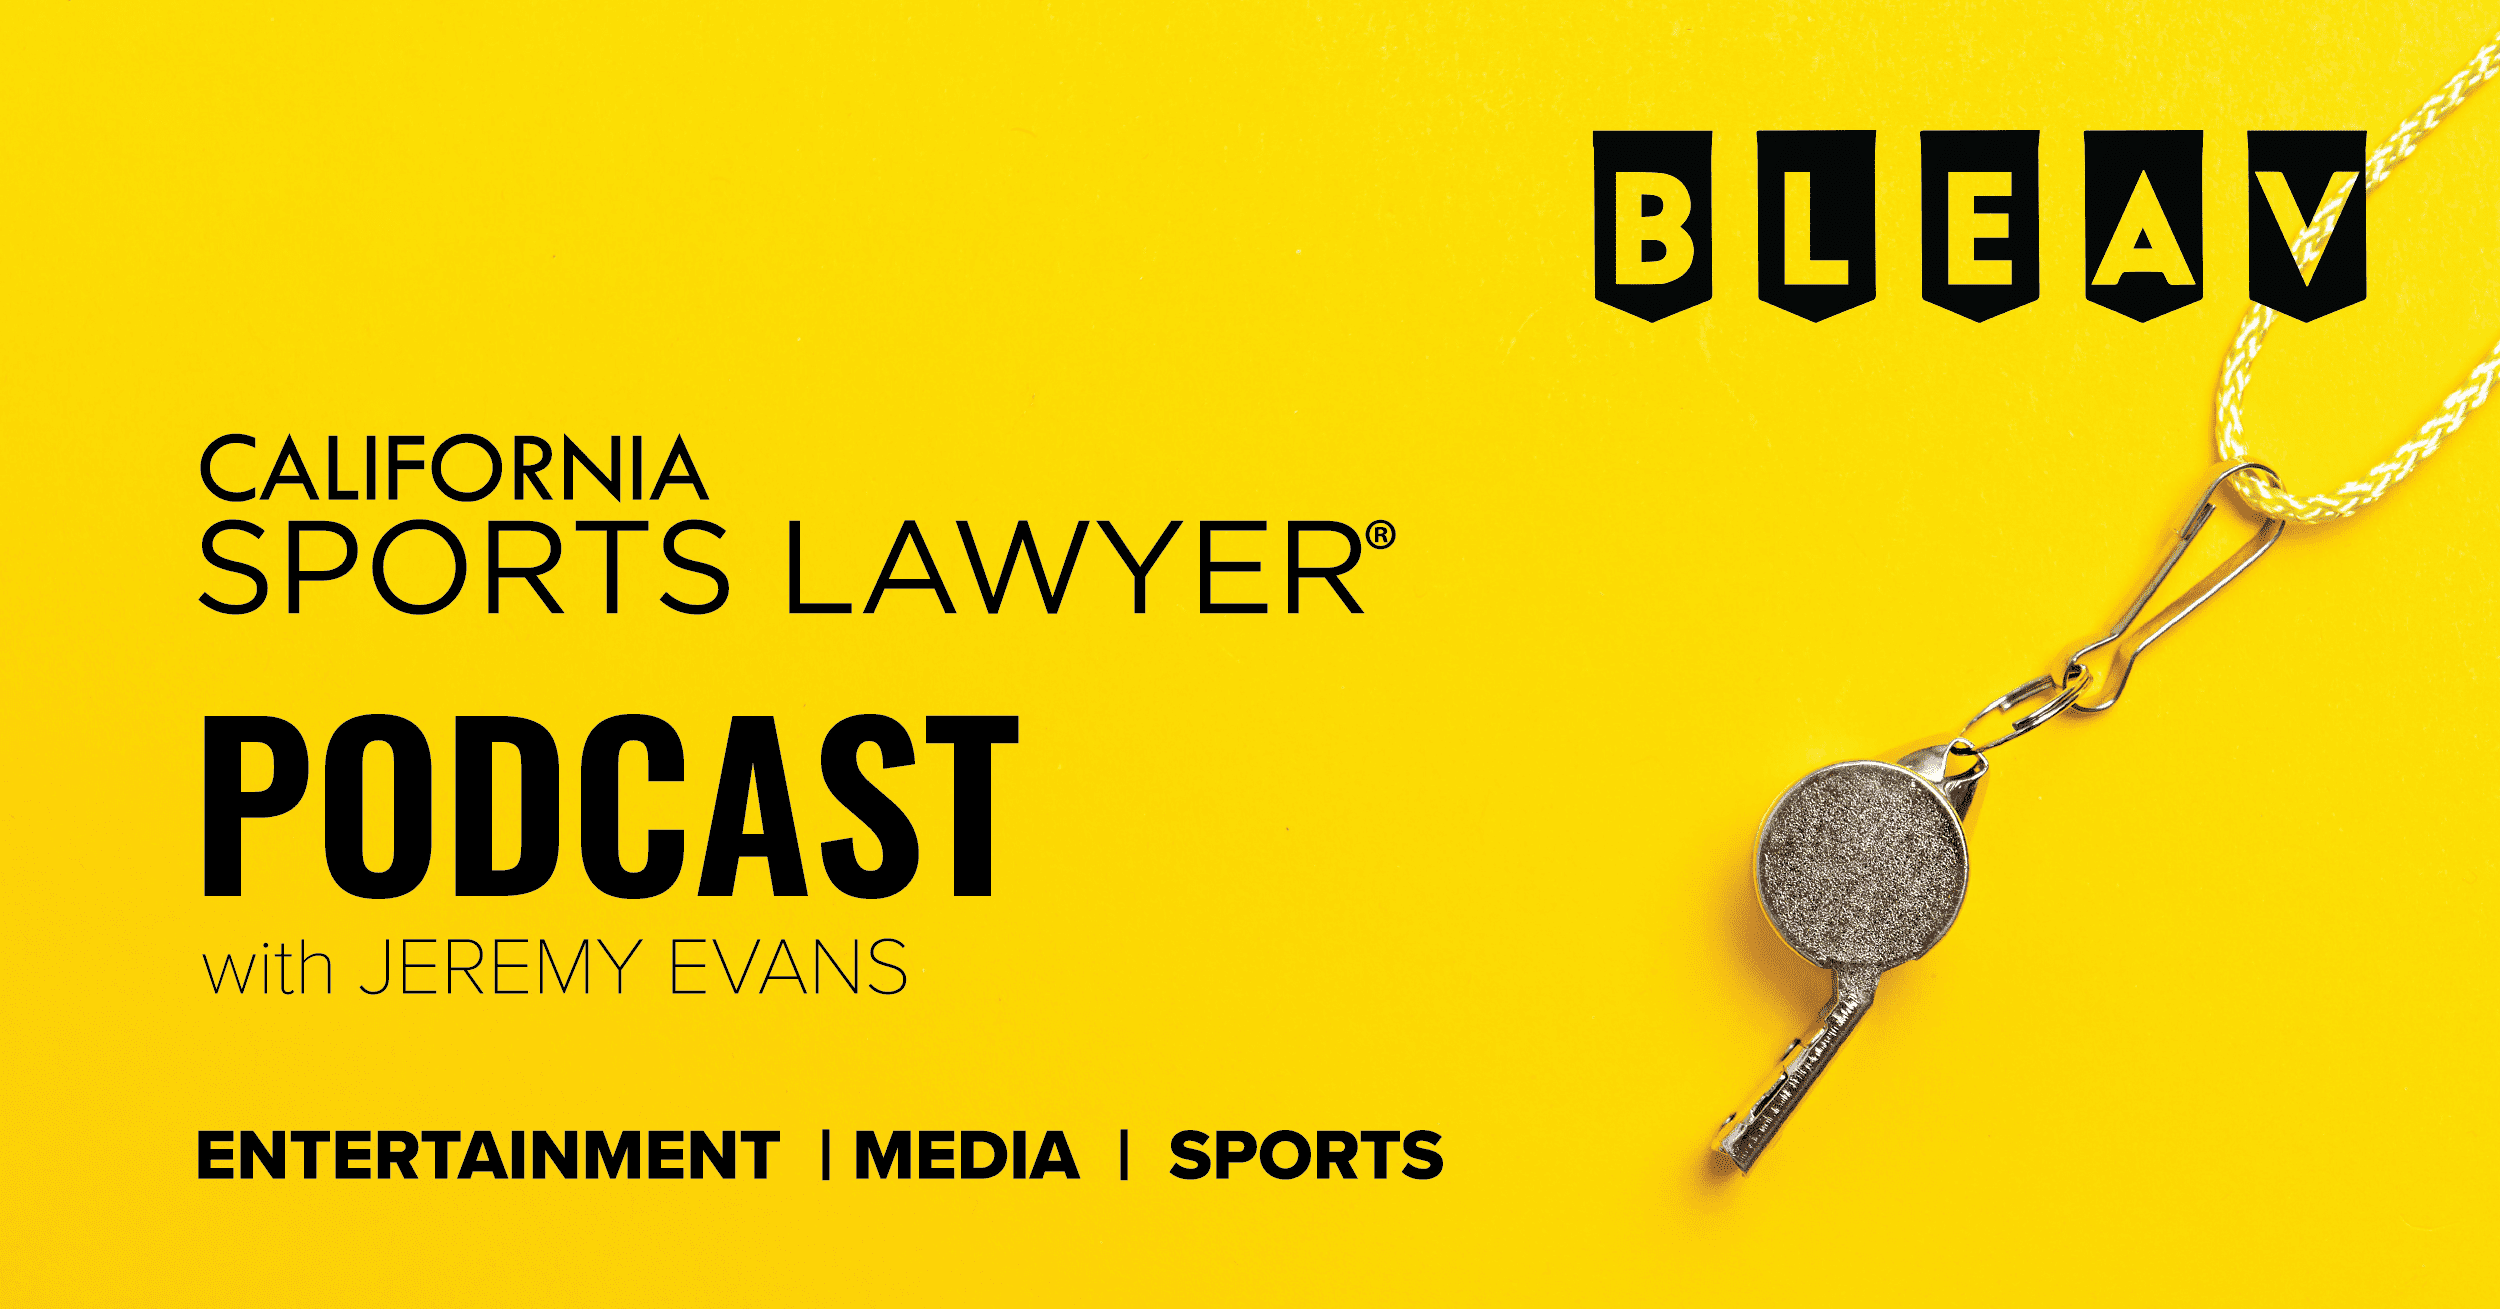 California Sports Lawyer® Podcast with Jeremy Evans: Can Naming-Rights deal Save Regional Sports Networks?